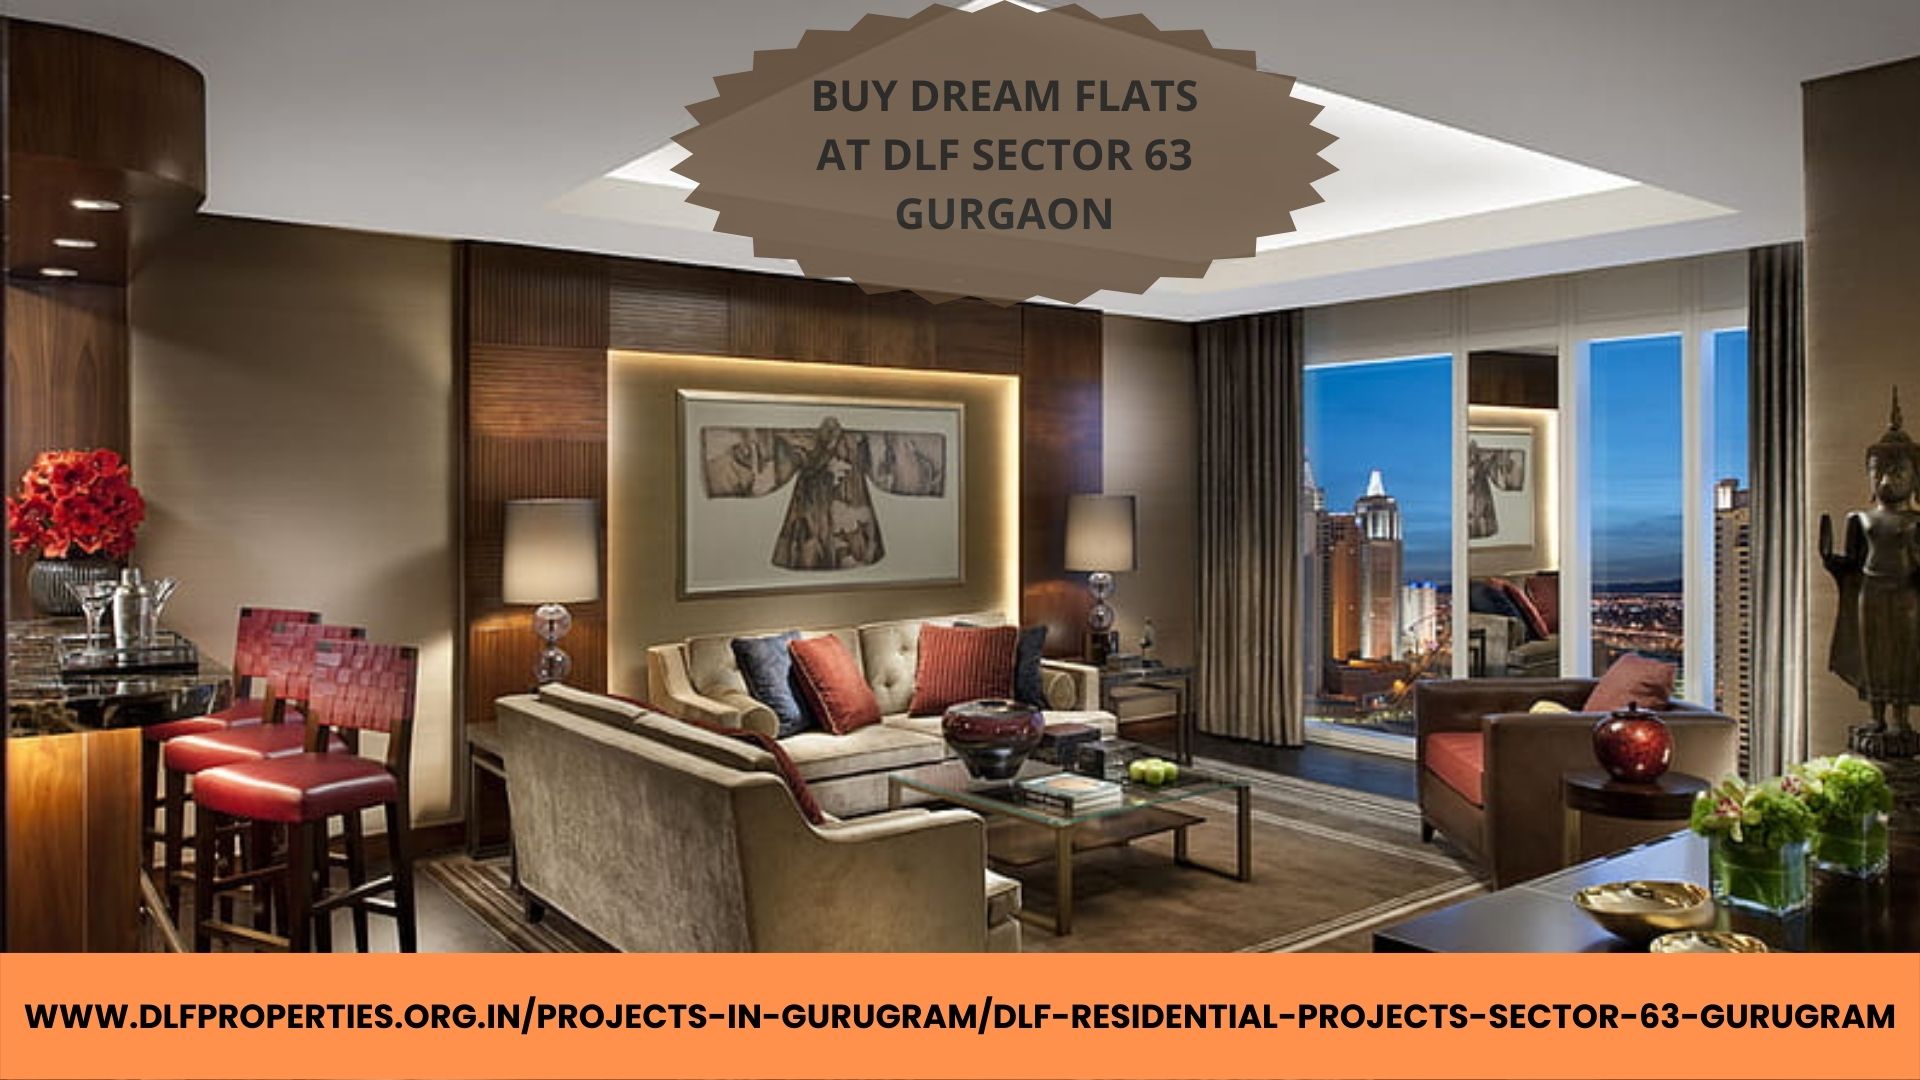 DLF Sector 63 Gurgaon | Ideal Blend Of Proximity To Nature and Upscale Amenities